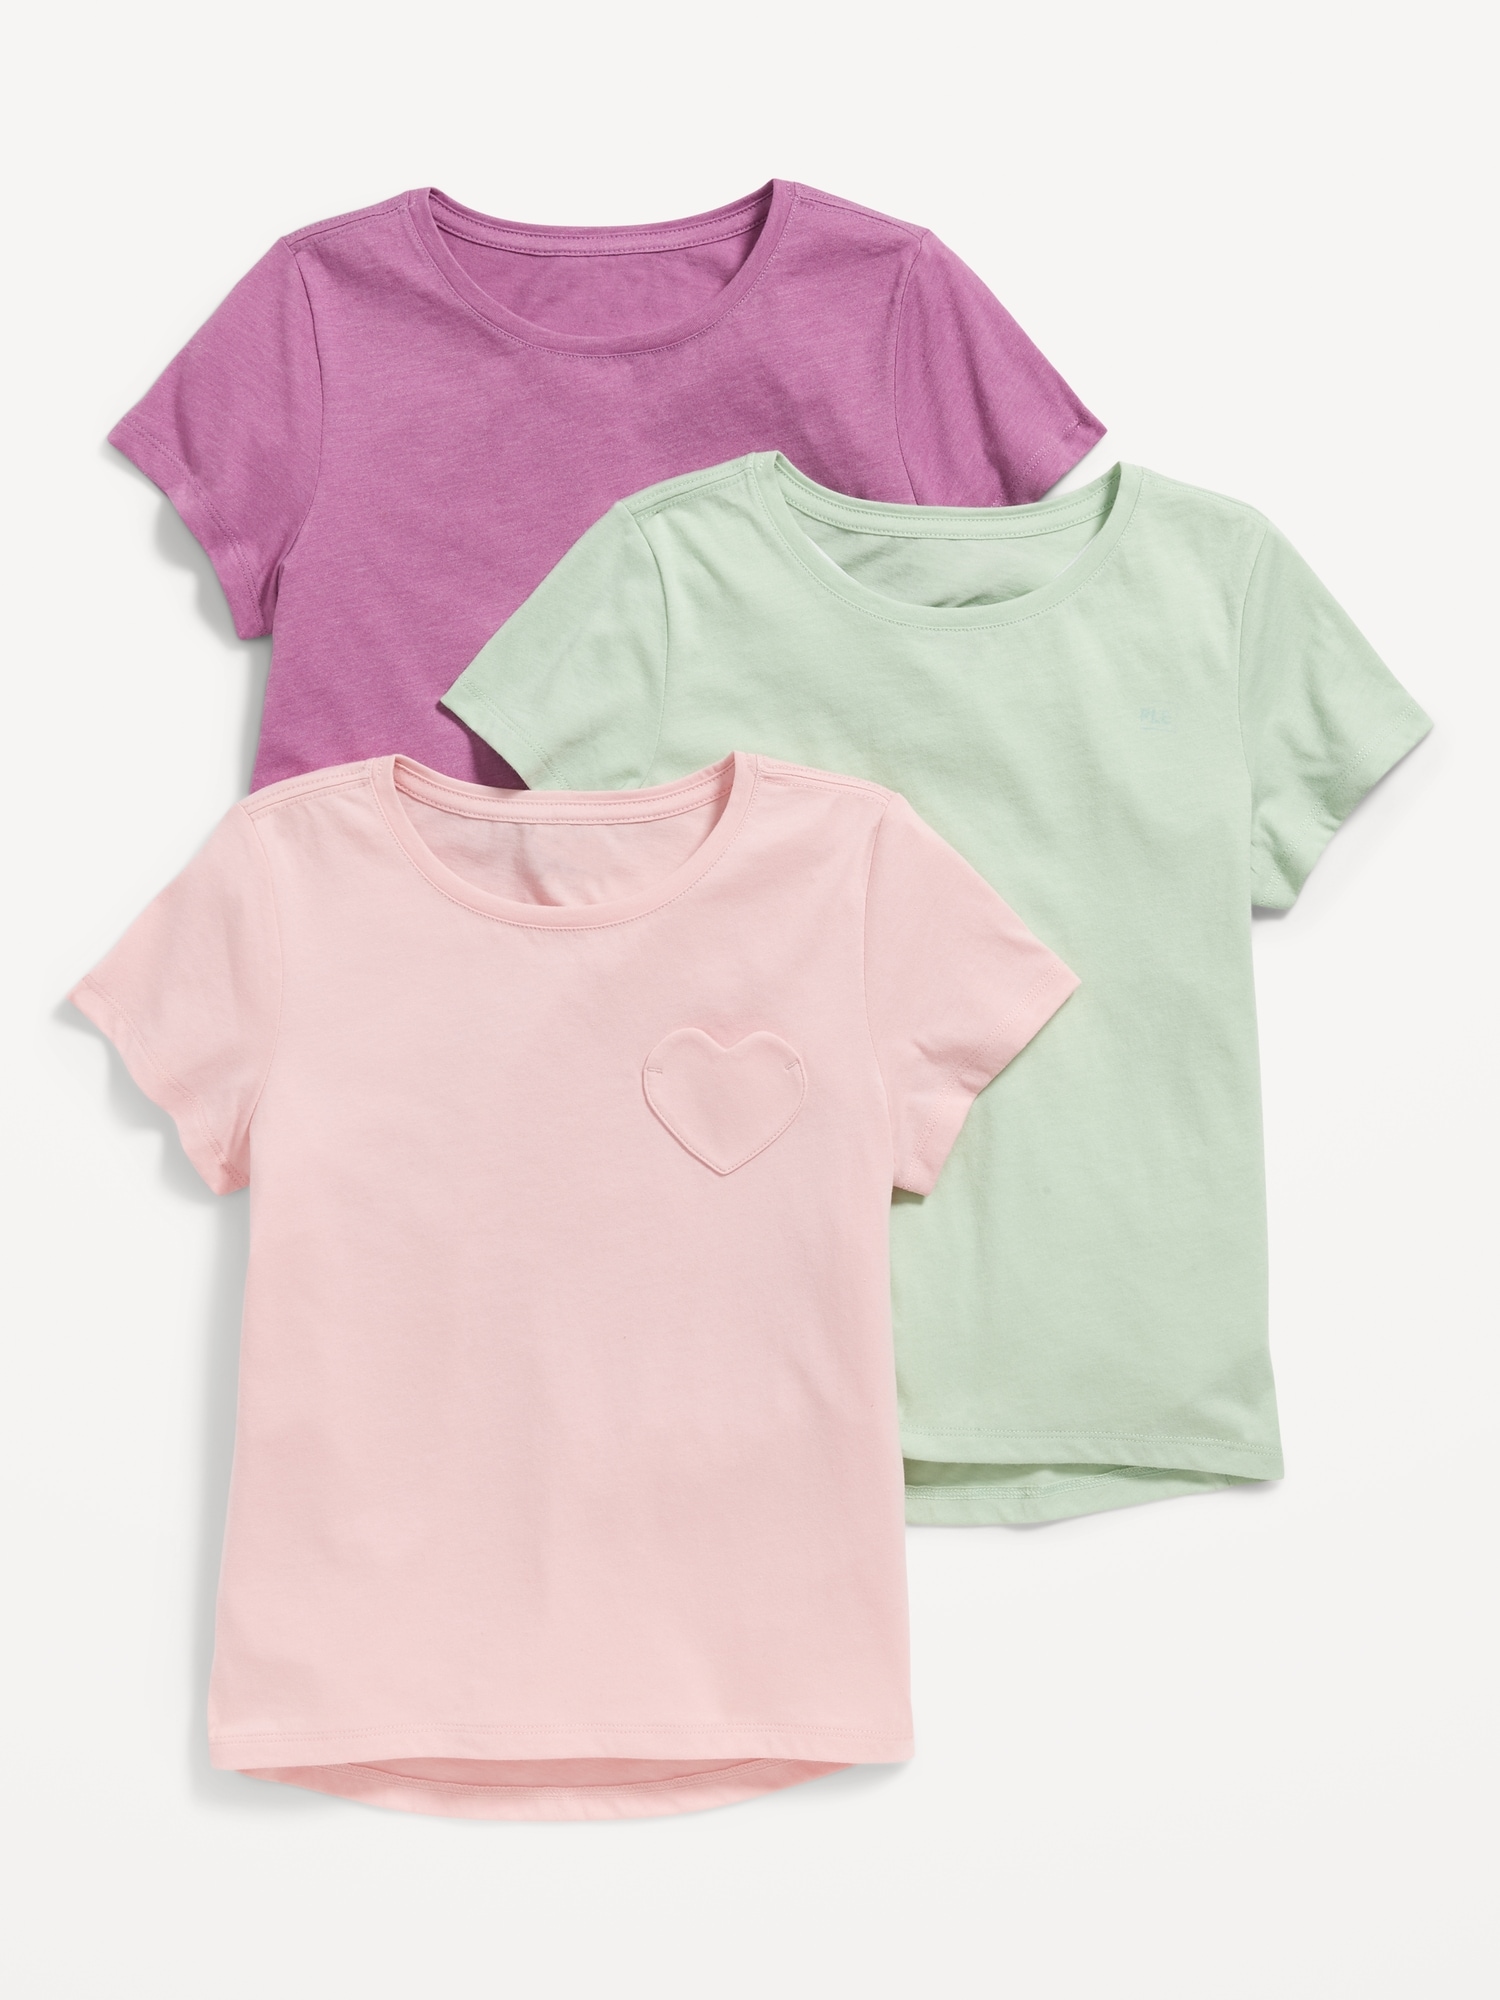 Old Navy Softest Printed T-Shirt 3-Pack for Girls green. 1